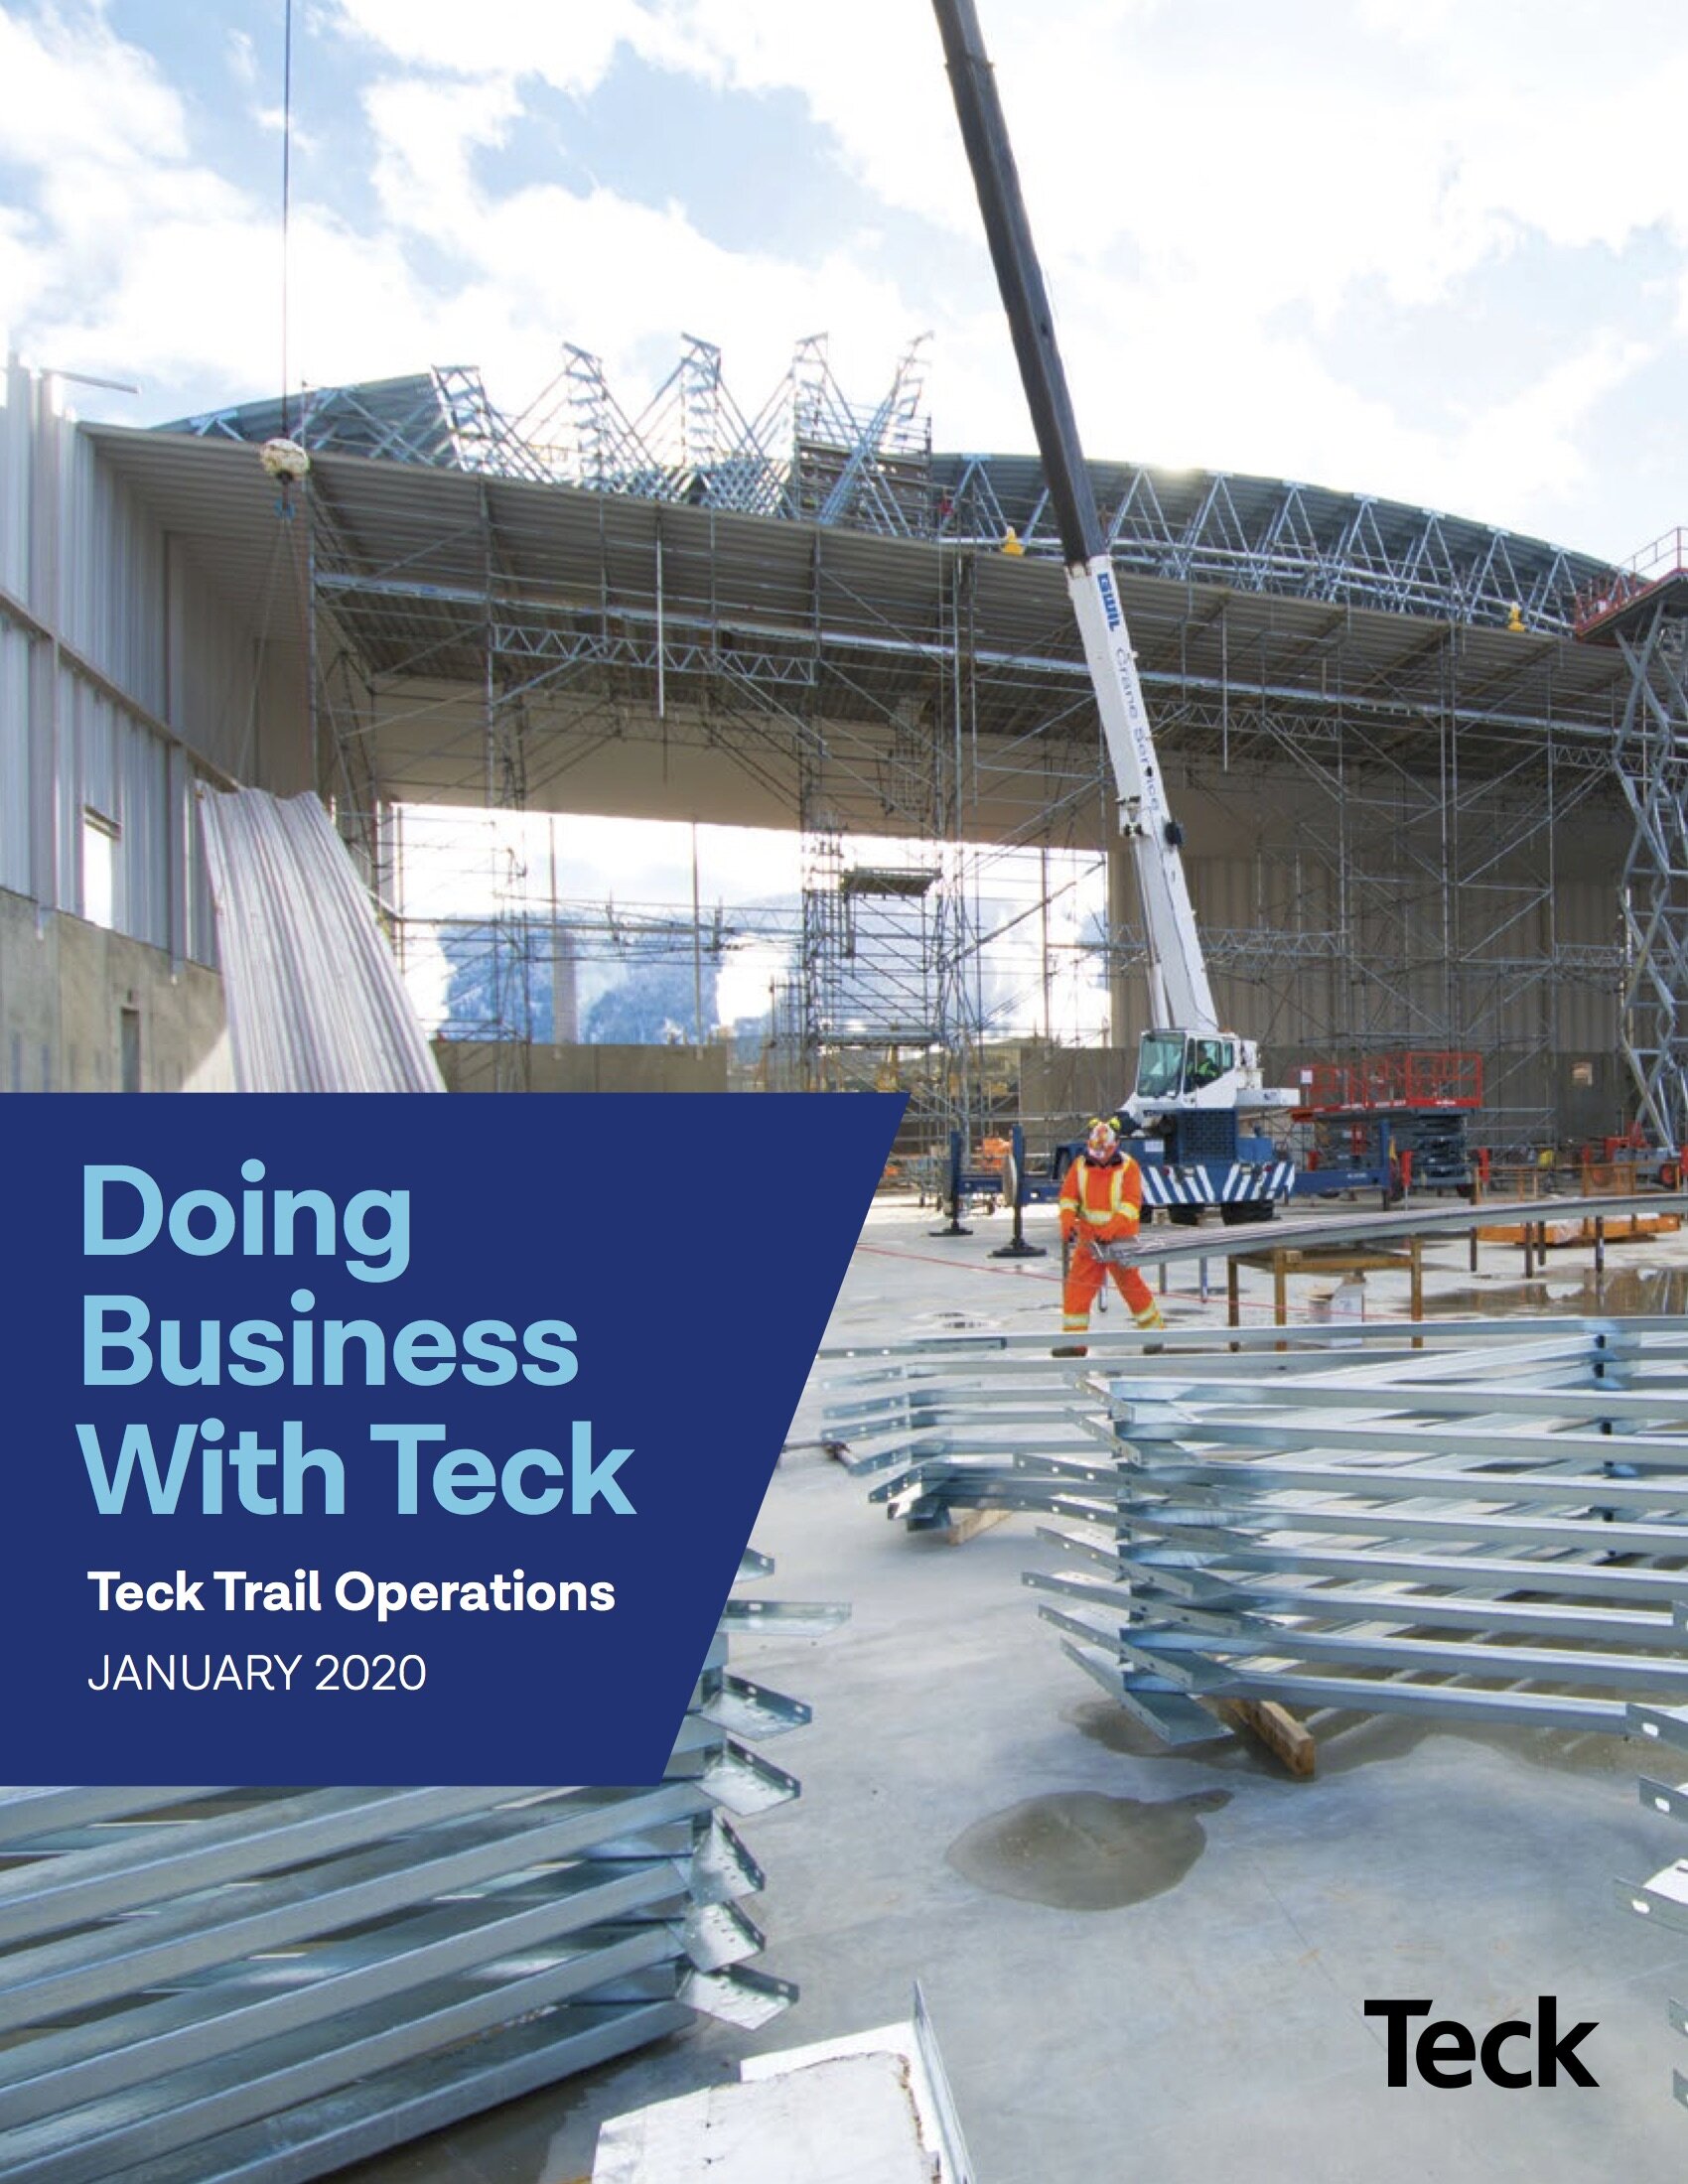 Cover Teck - Doing Business With Teck - January 2020.jpg